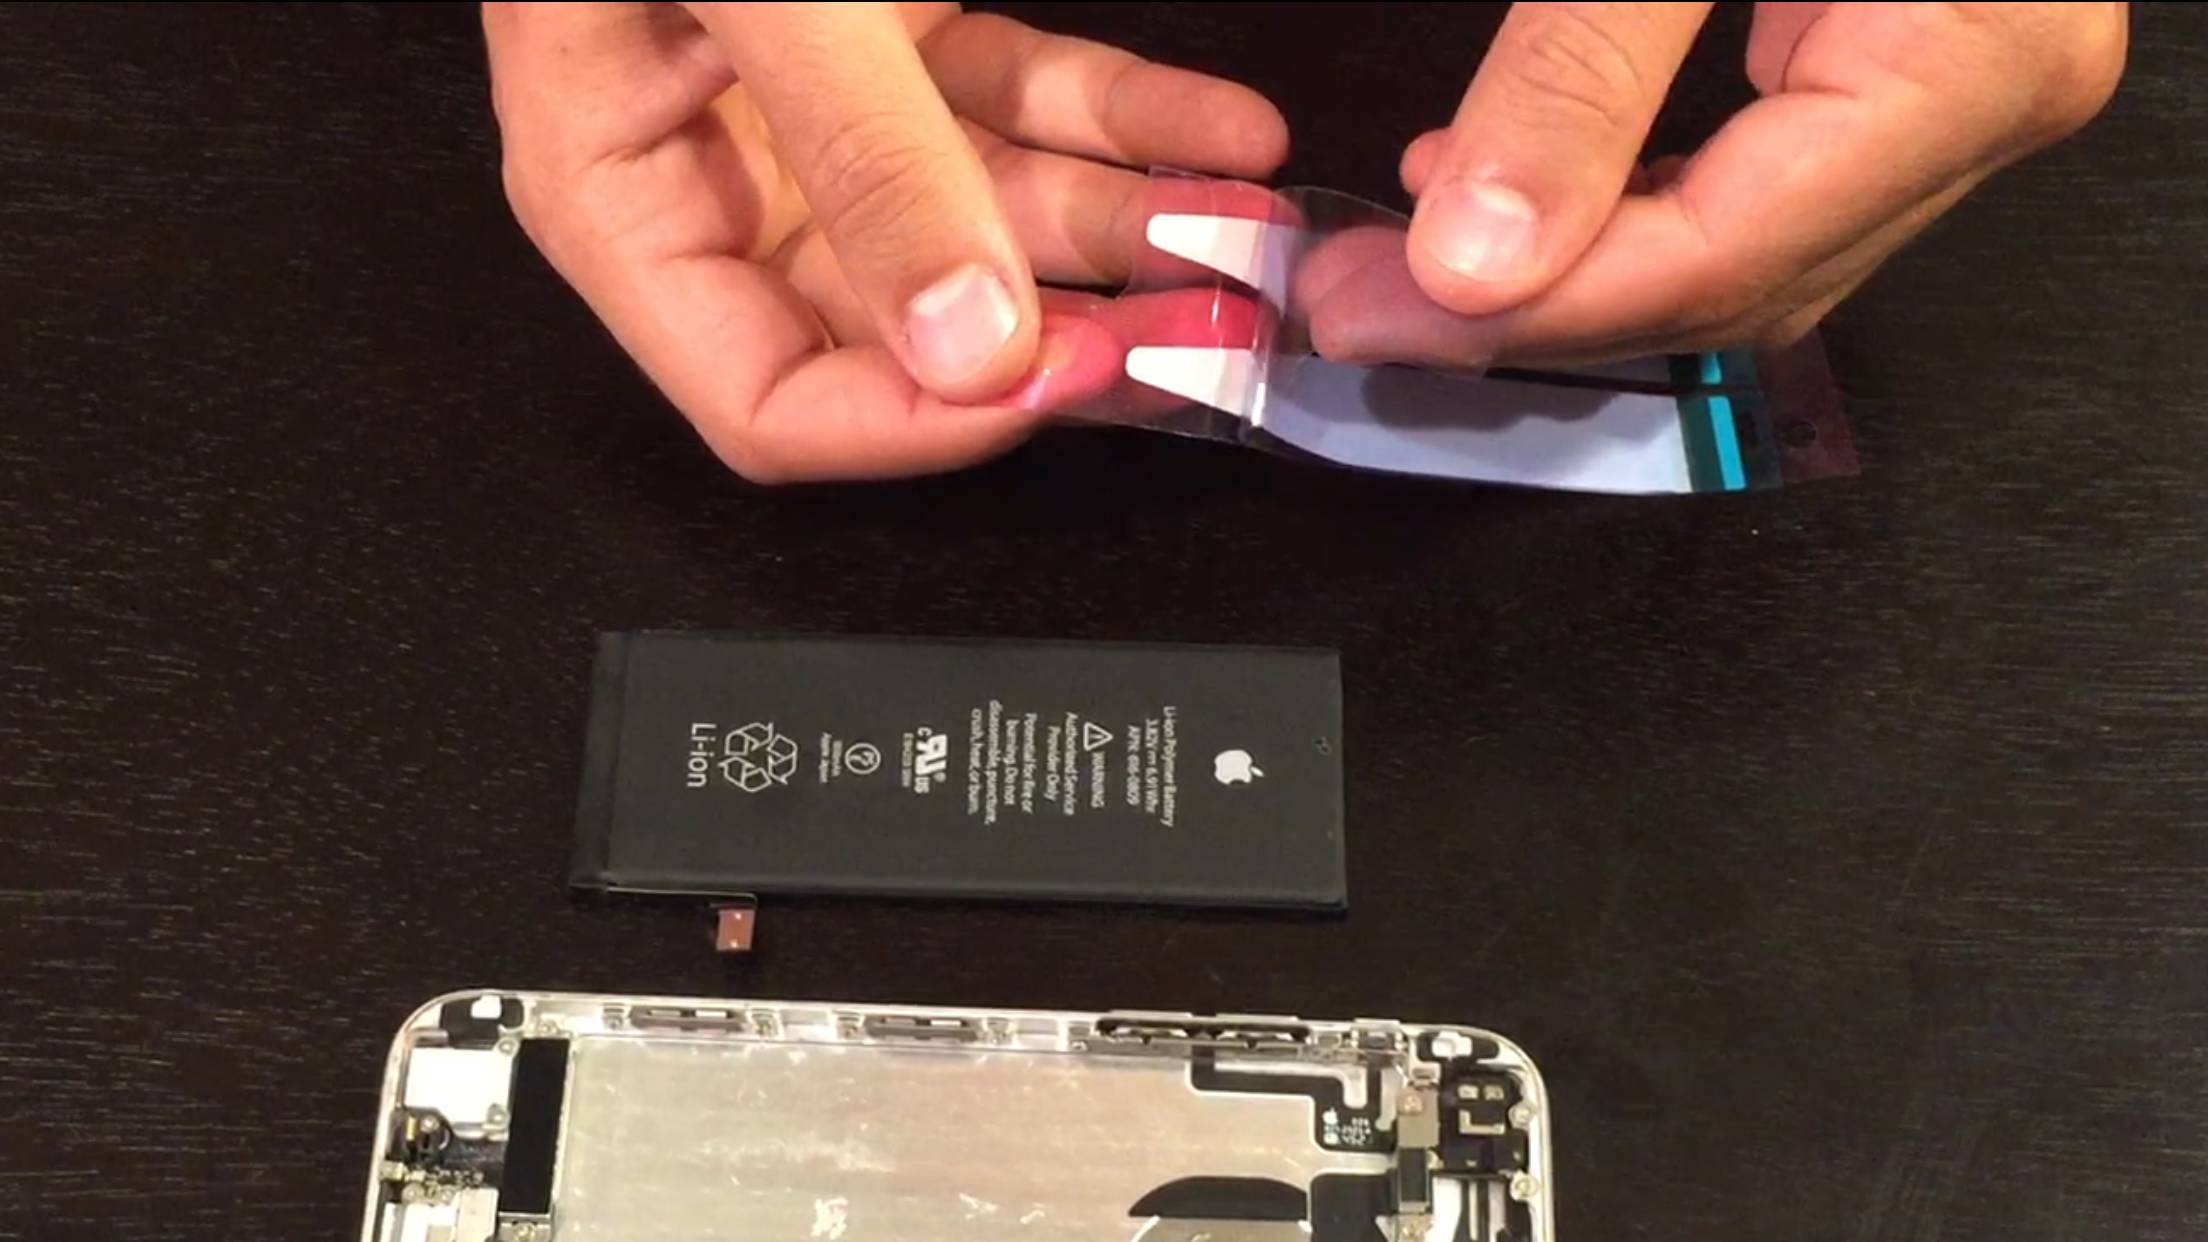 iPhone 6/6+ battery replacement guide - Installing new adhesive - 2